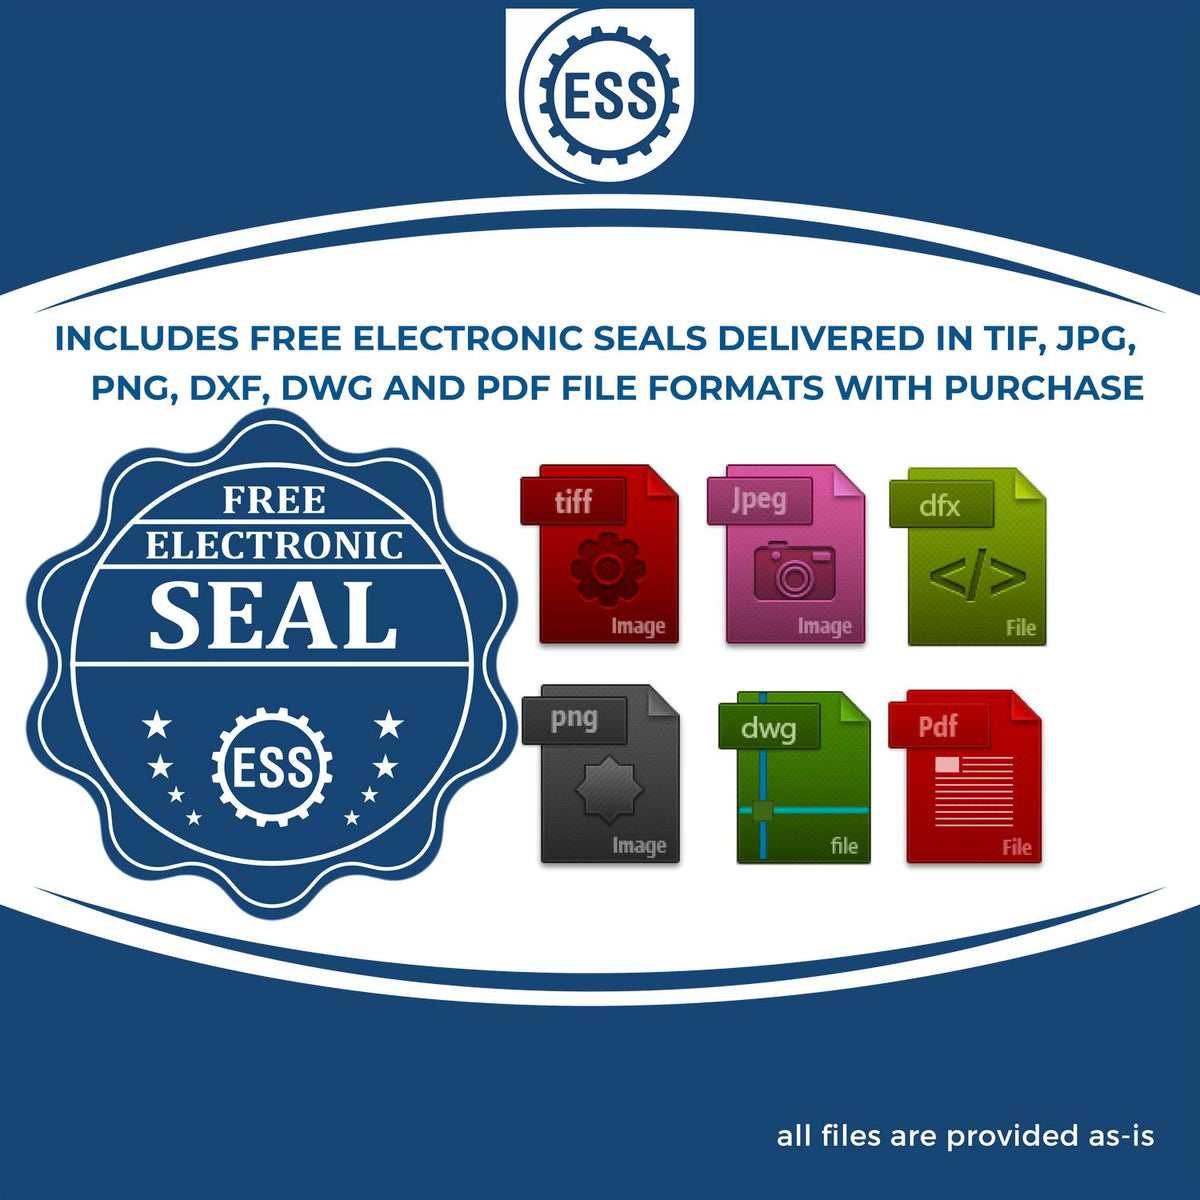 An infographic for the free electronic seal for the Heavy-Duty New Mexico Rectangular Notary Stamp illustrating the different file type icons such as DXF, DWG, TIF, JPG and PNG.